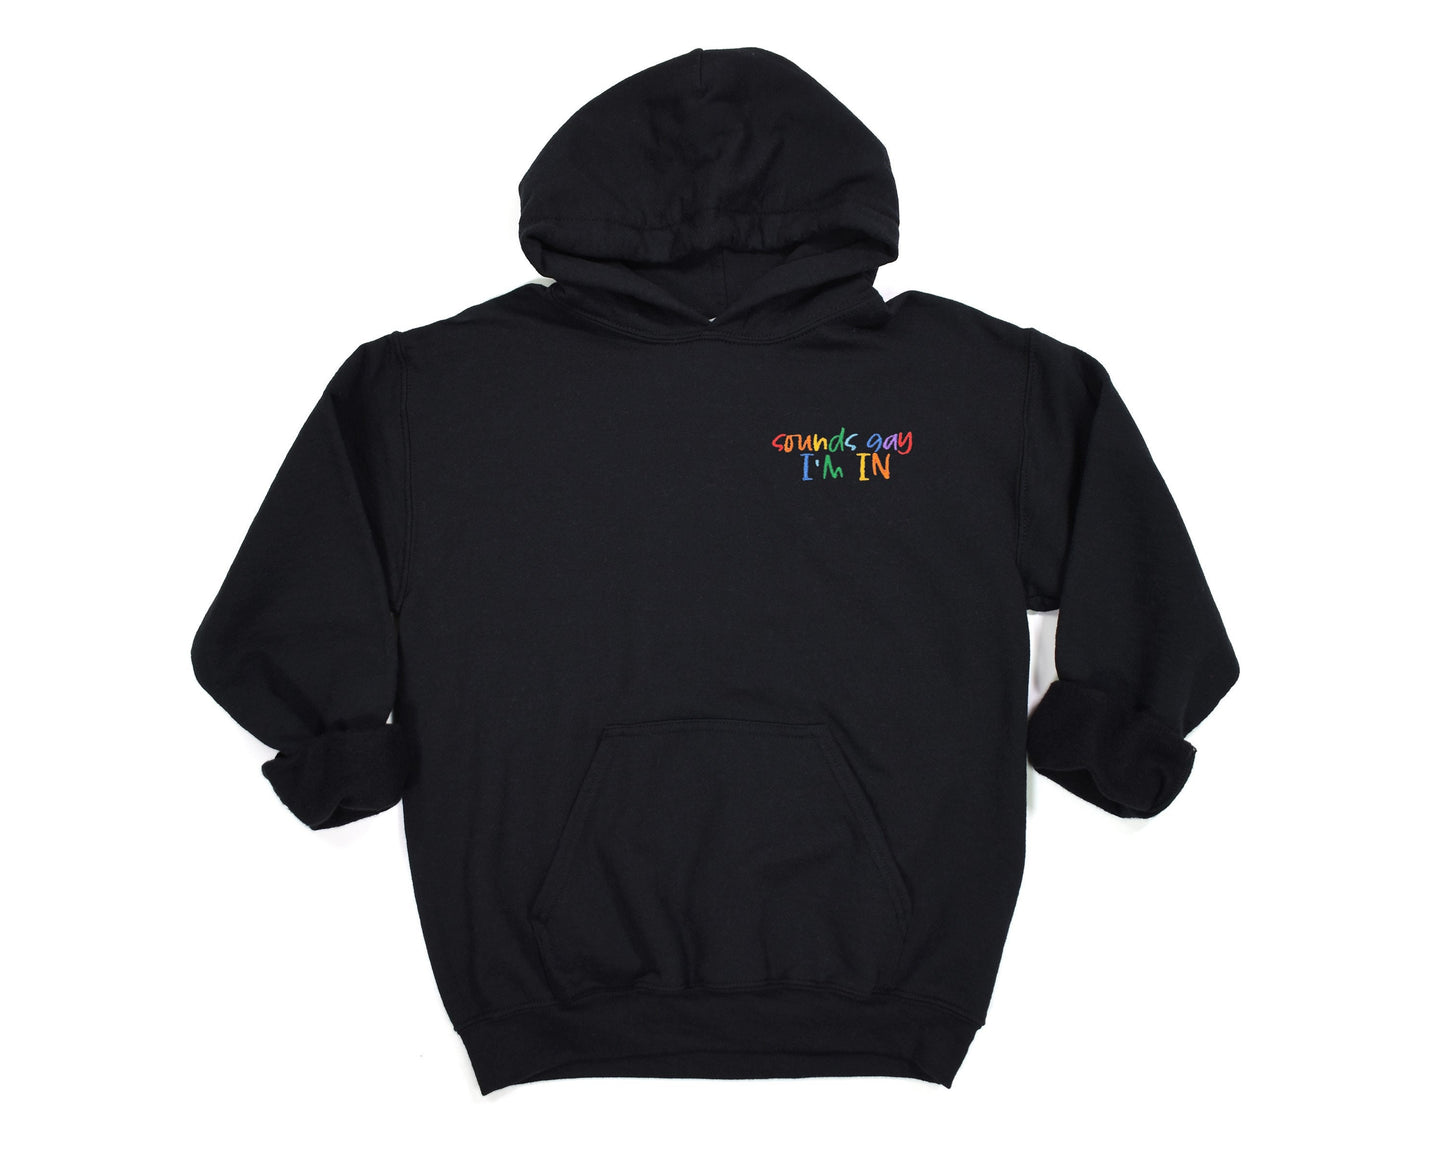 Embroidered Sounds Gay I'm In Unisex Hoodie Sweatshirt